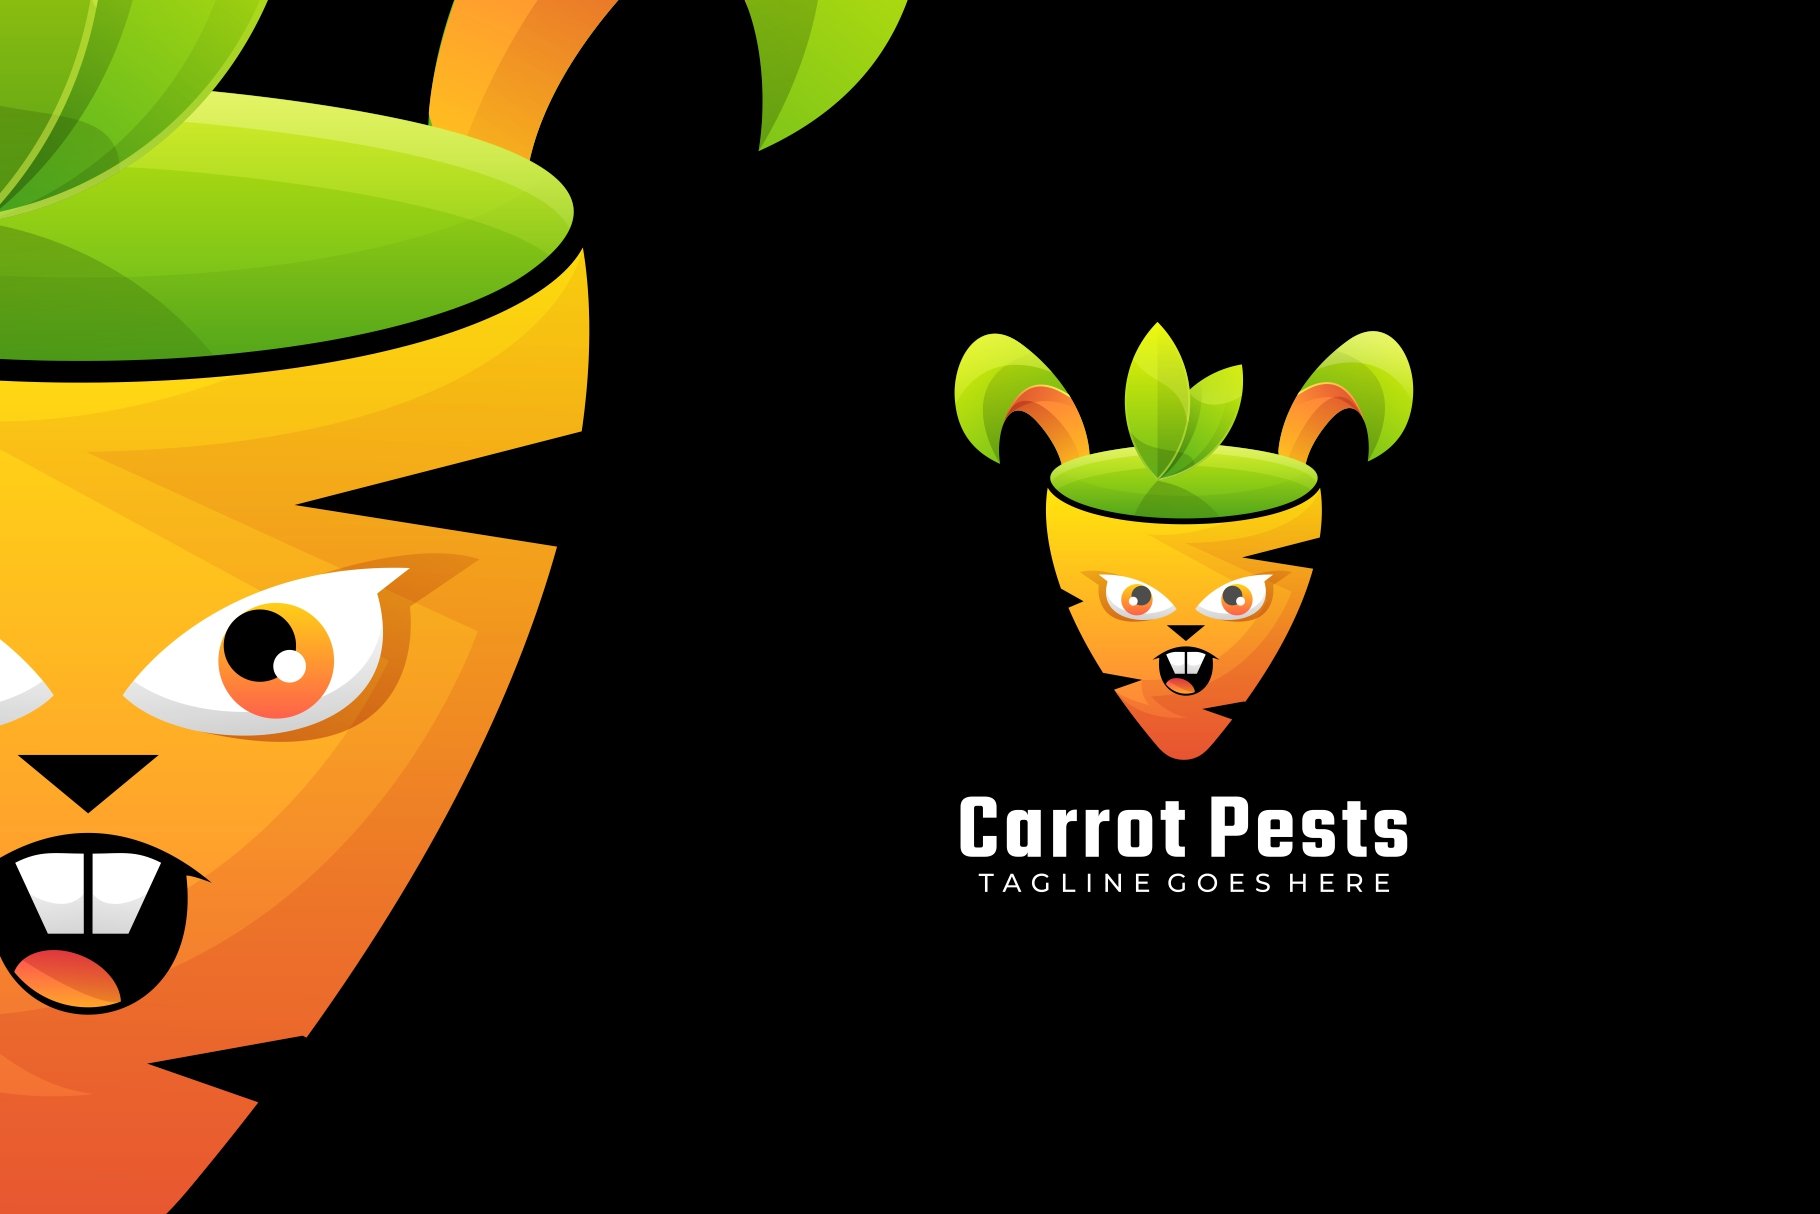 Carrot Pests Gradient Logo cover image.